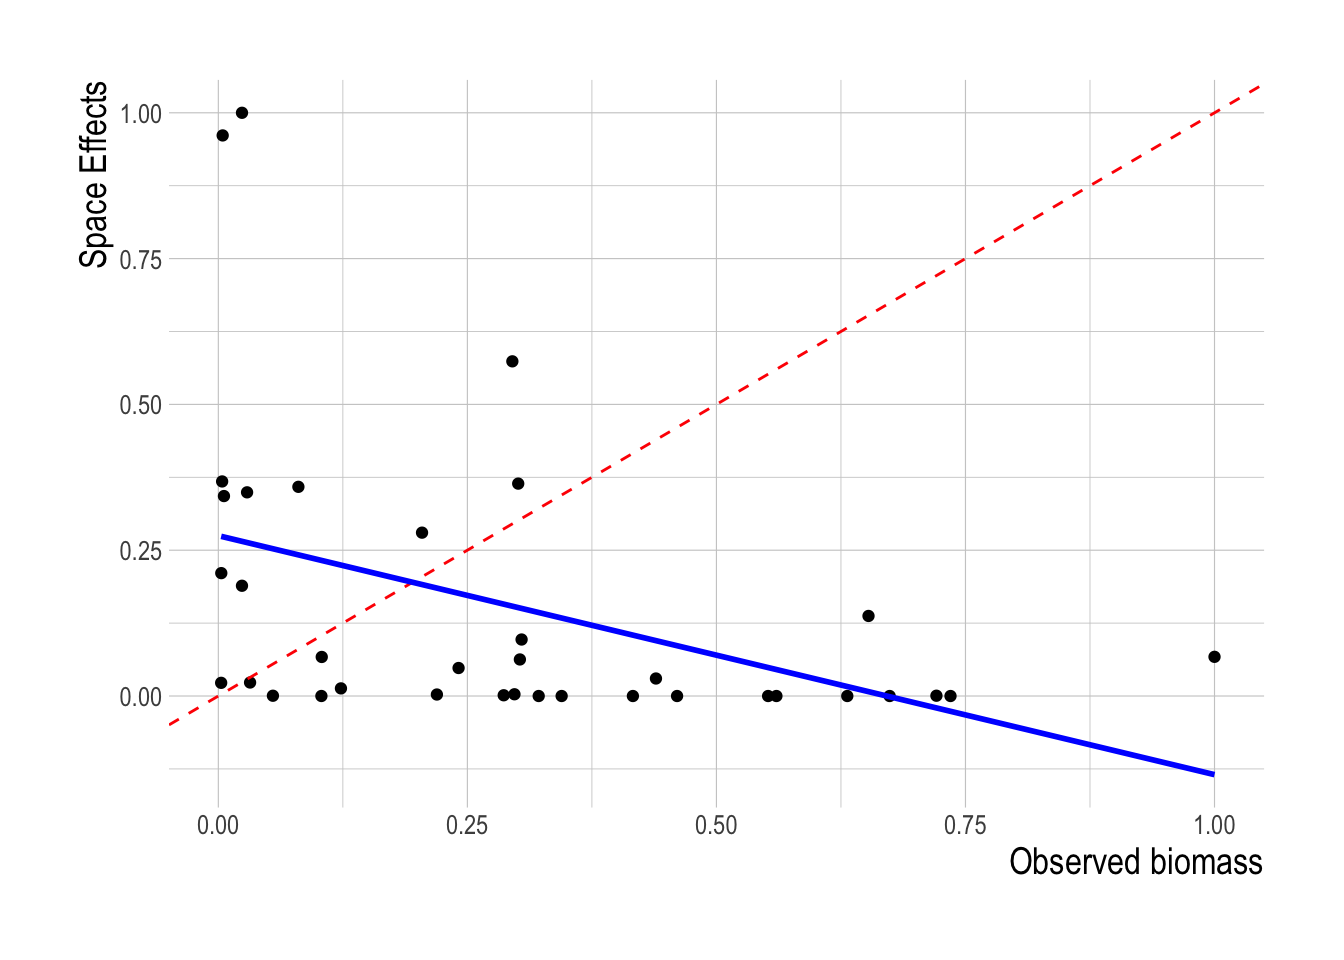 Scaled latent biomass coefficients plotted against paired scaled biomass estimates. Red dashed line shows 1:1 relationship, blue line a fitted linear model to the observed and predicted values